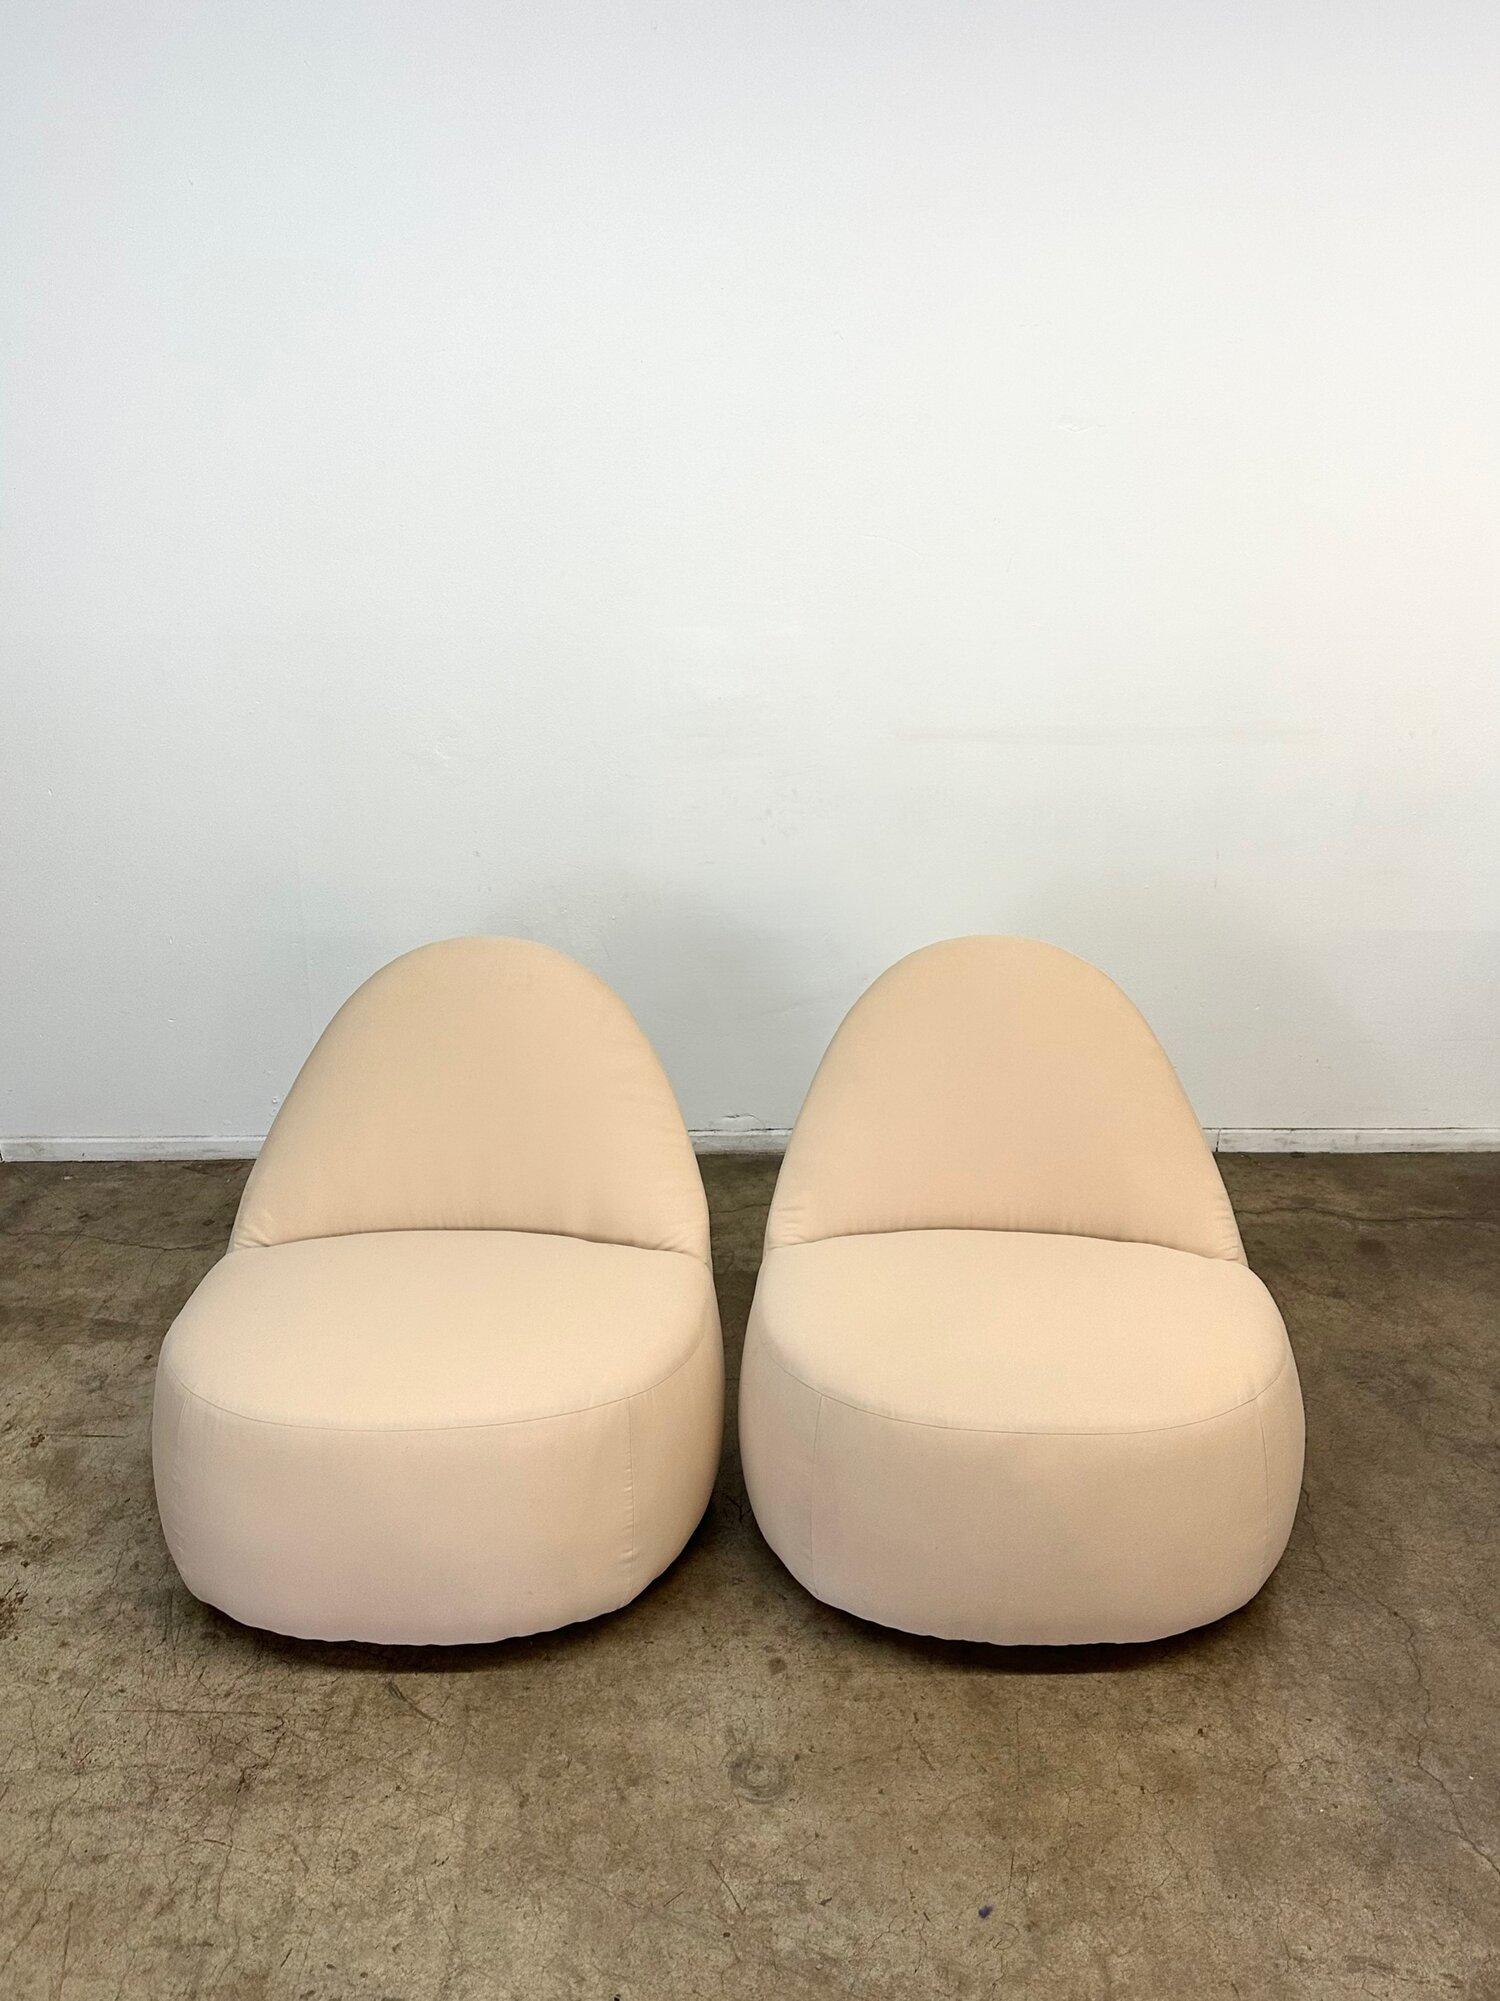 Measures : W30 D23 H31 SW29 SD20 SH15

Claudia & Harry Washington Mitt lounge chairs for Bernhardt, circa 2015. Chairs have been upholstered in beige outdoor fabric. Chairs are meant for indoor use, but have been upholstered in outdoor fabric for